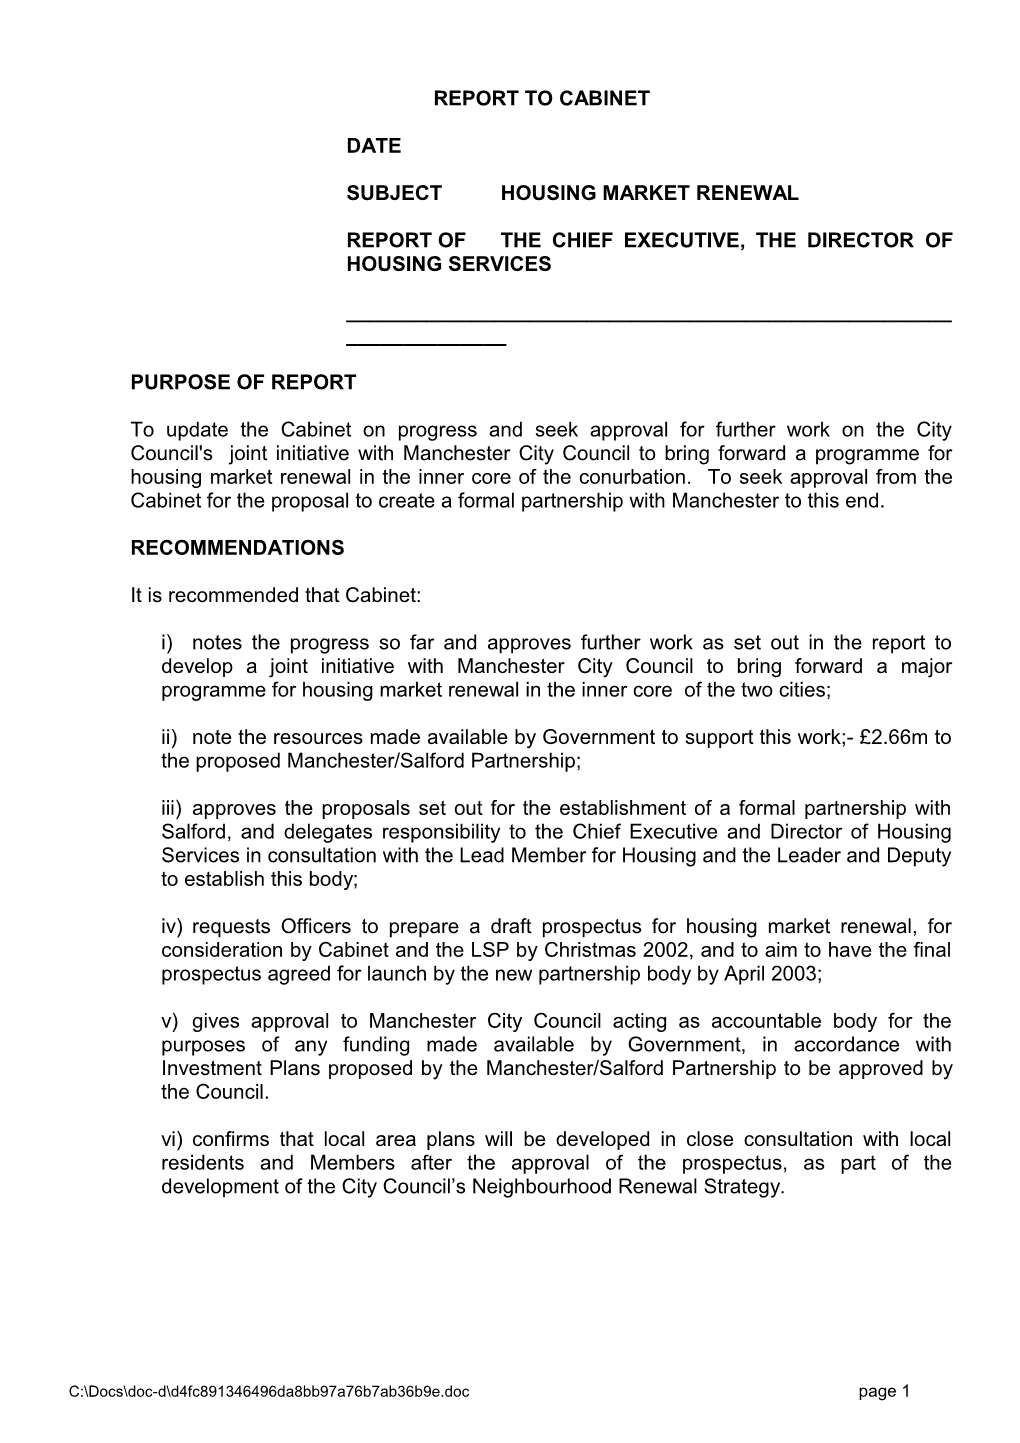 Report Ofthe Chief Executive, the Directorof Housing Services